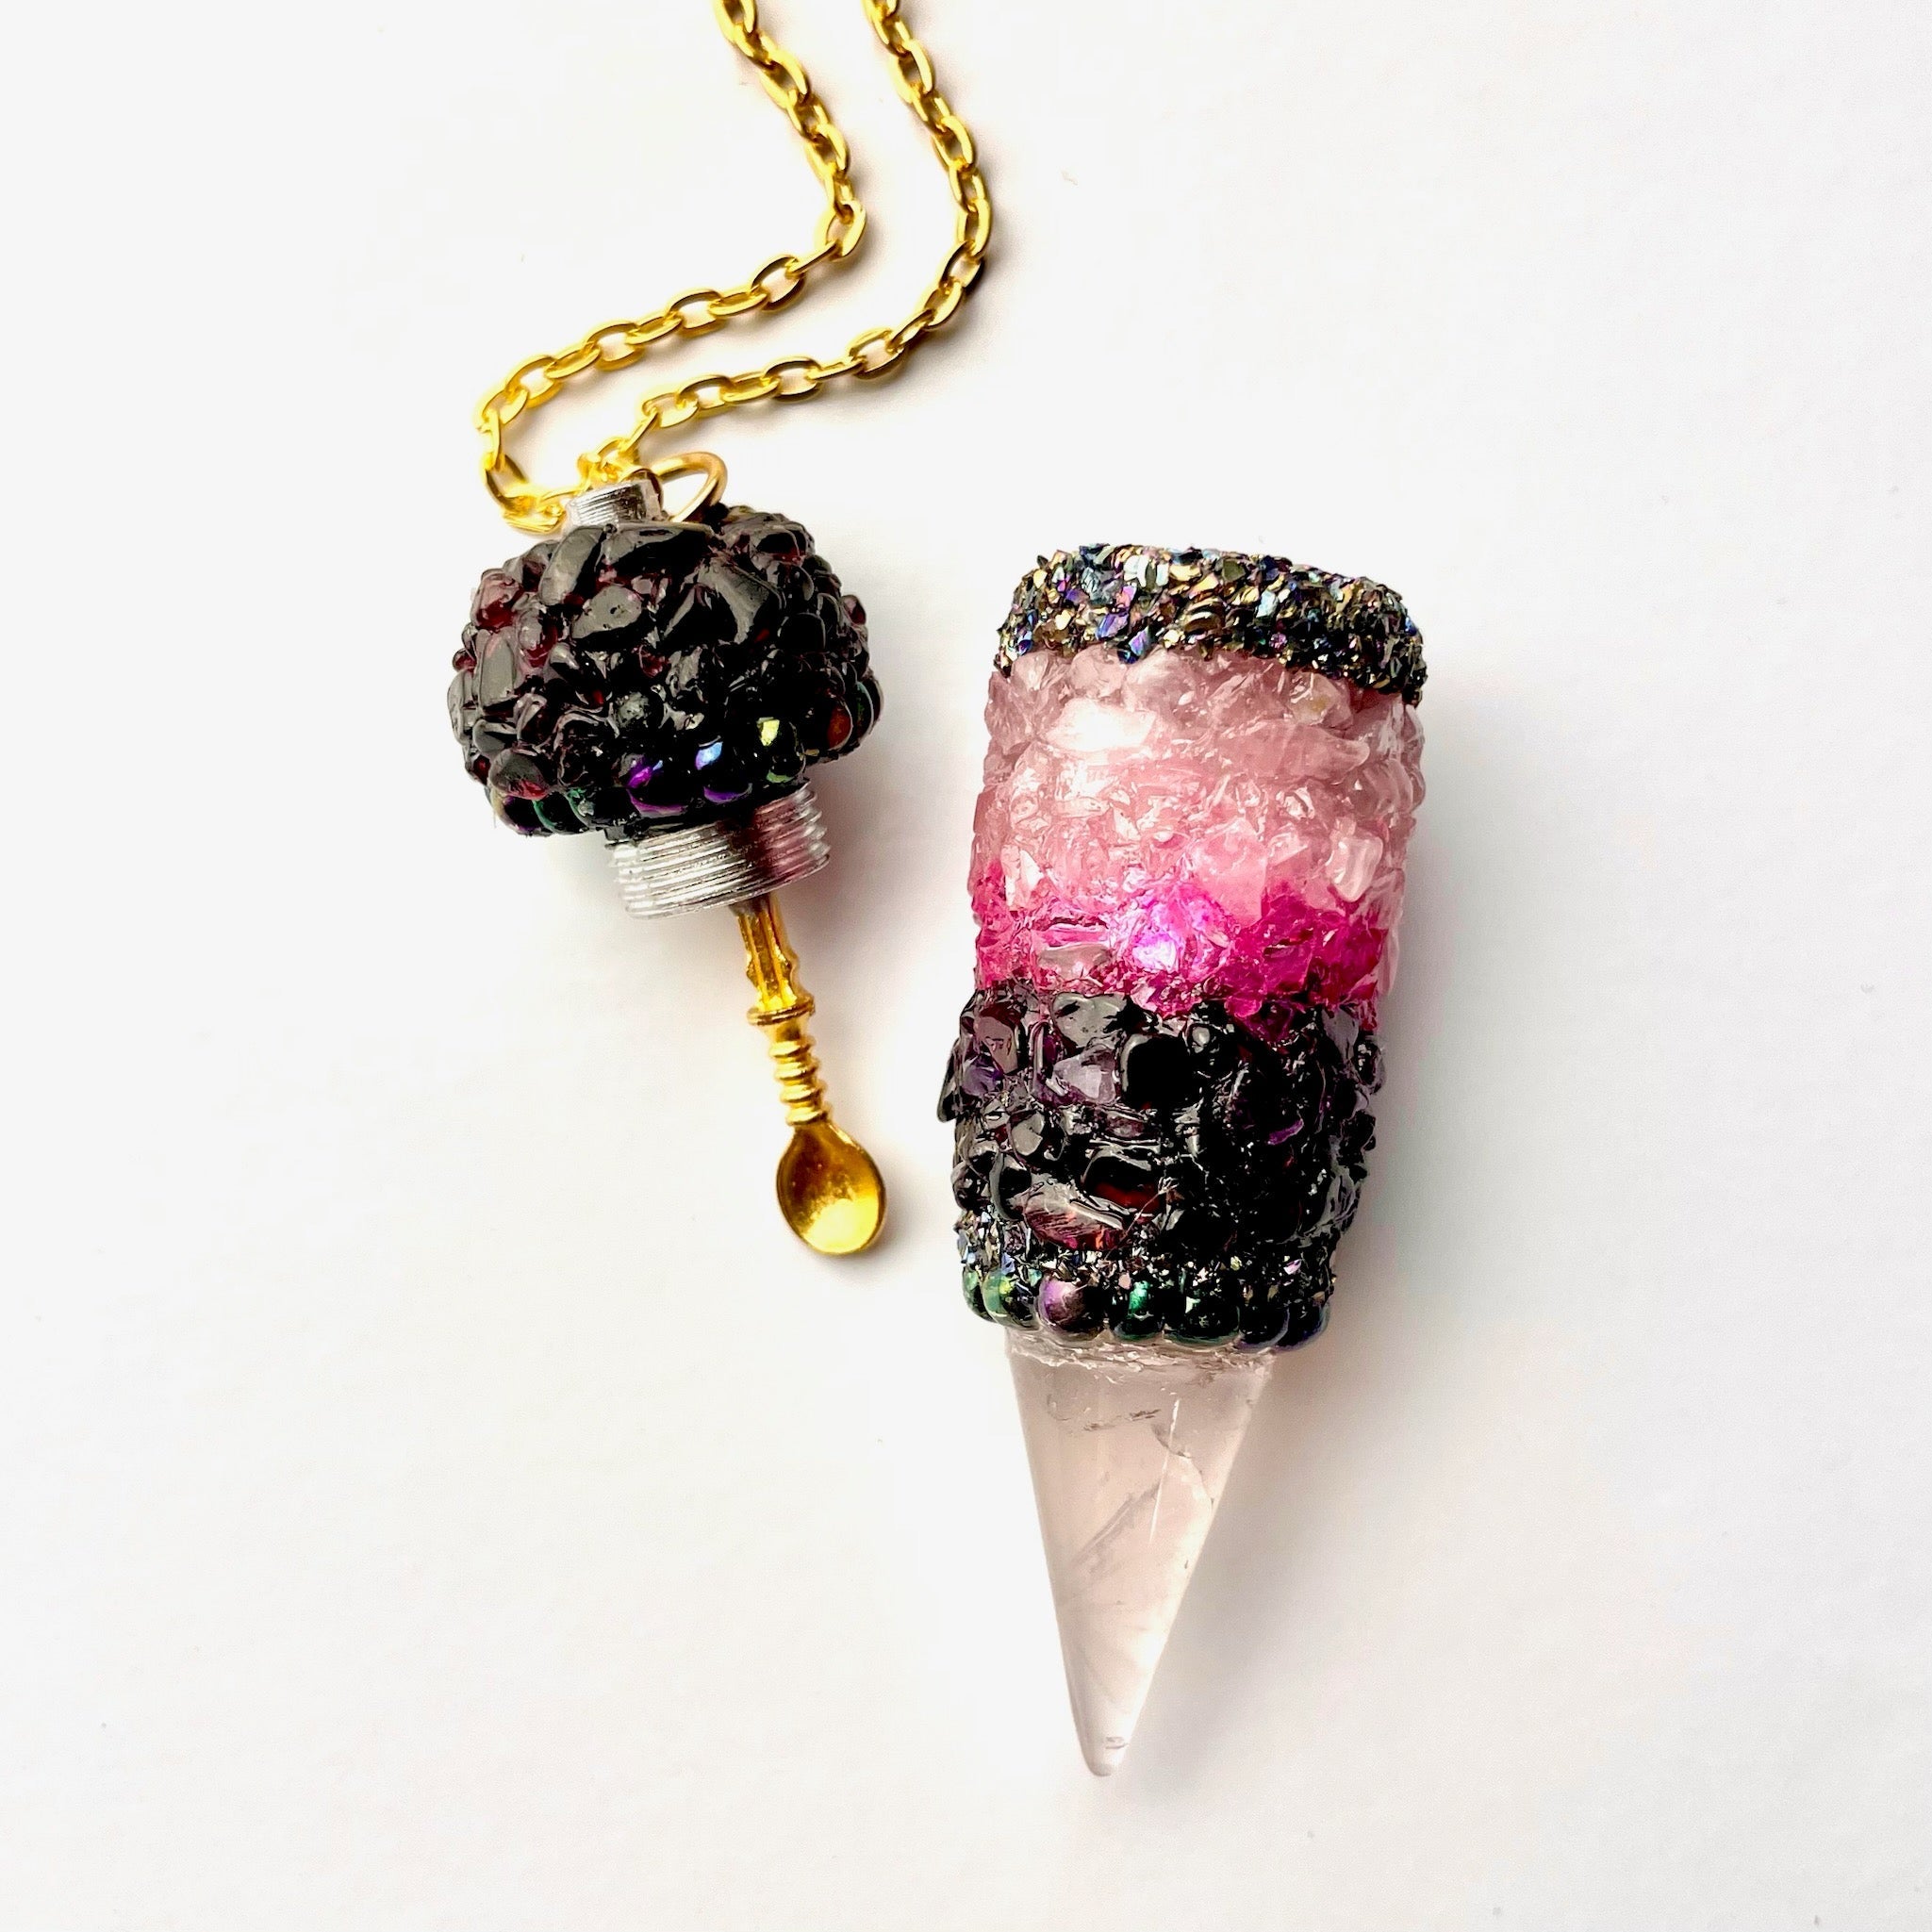 Stash Necklace with Spoon - Pink Quartz As Pictured / No Spoon / No Spoon